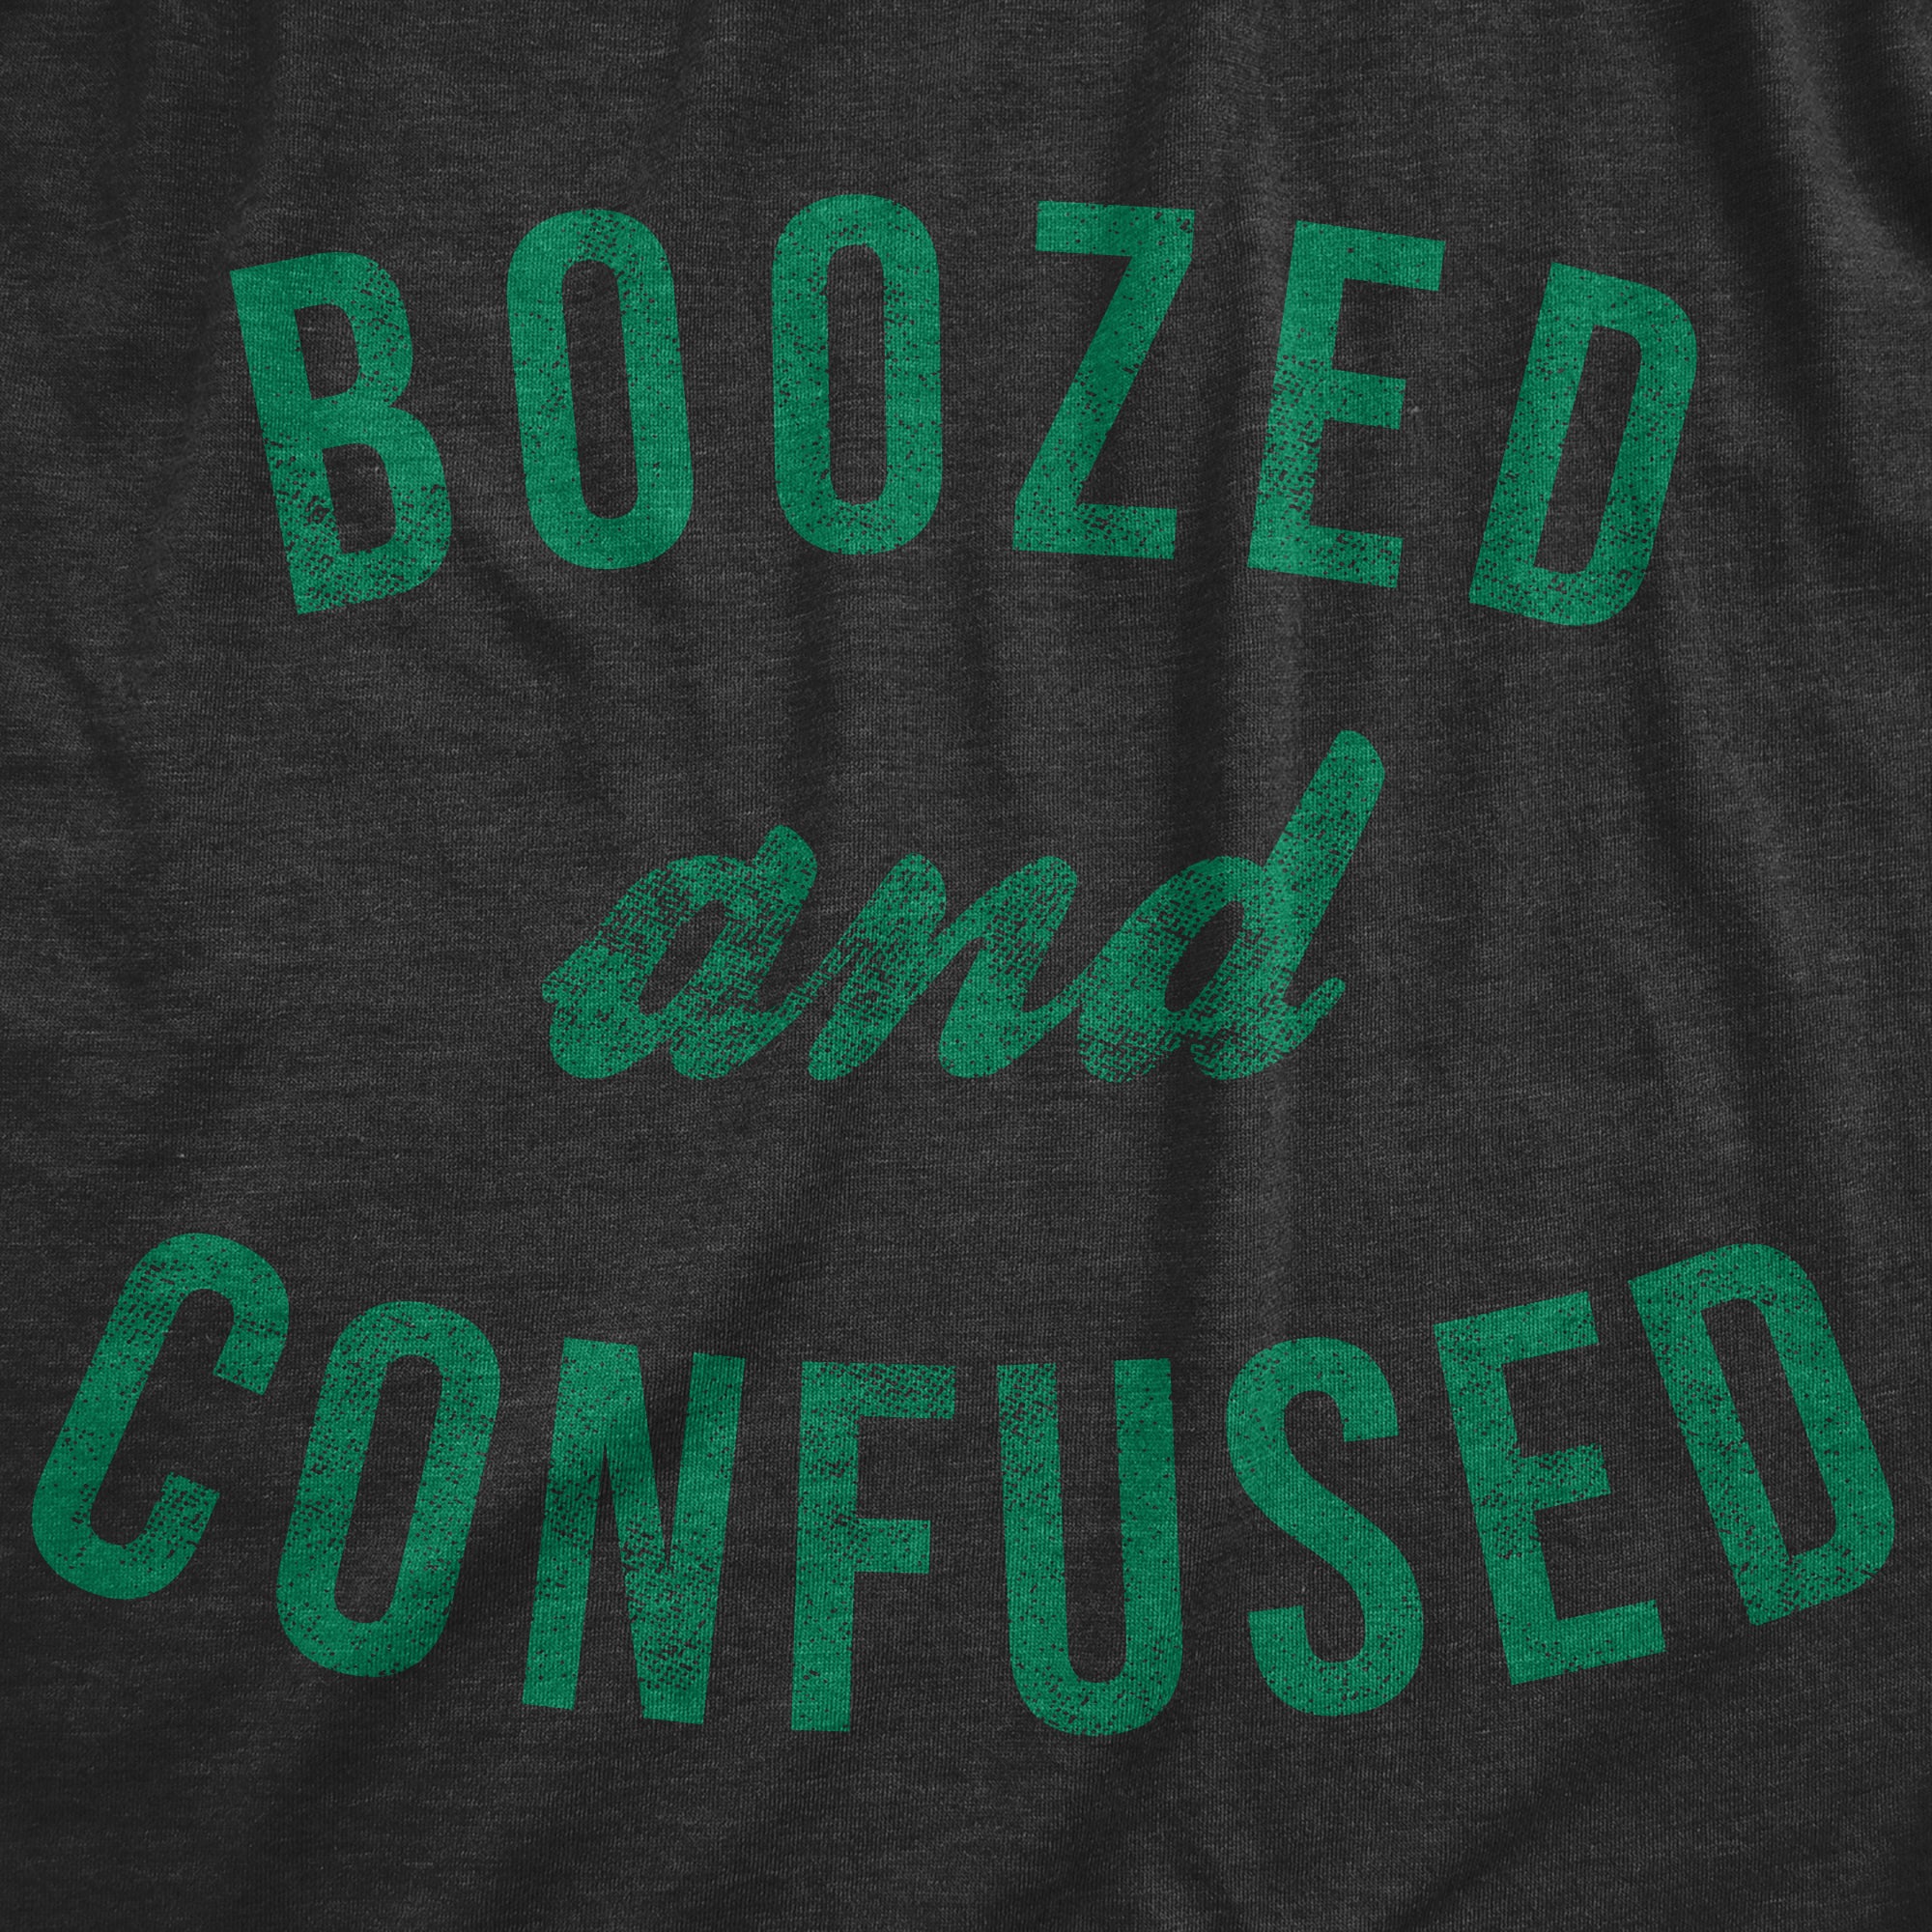 Funny Heather Black - Boozed Confused Boozed And Confused Mens T Shirt Nerdy Saint Patrick's Day Drinking Beer Tee